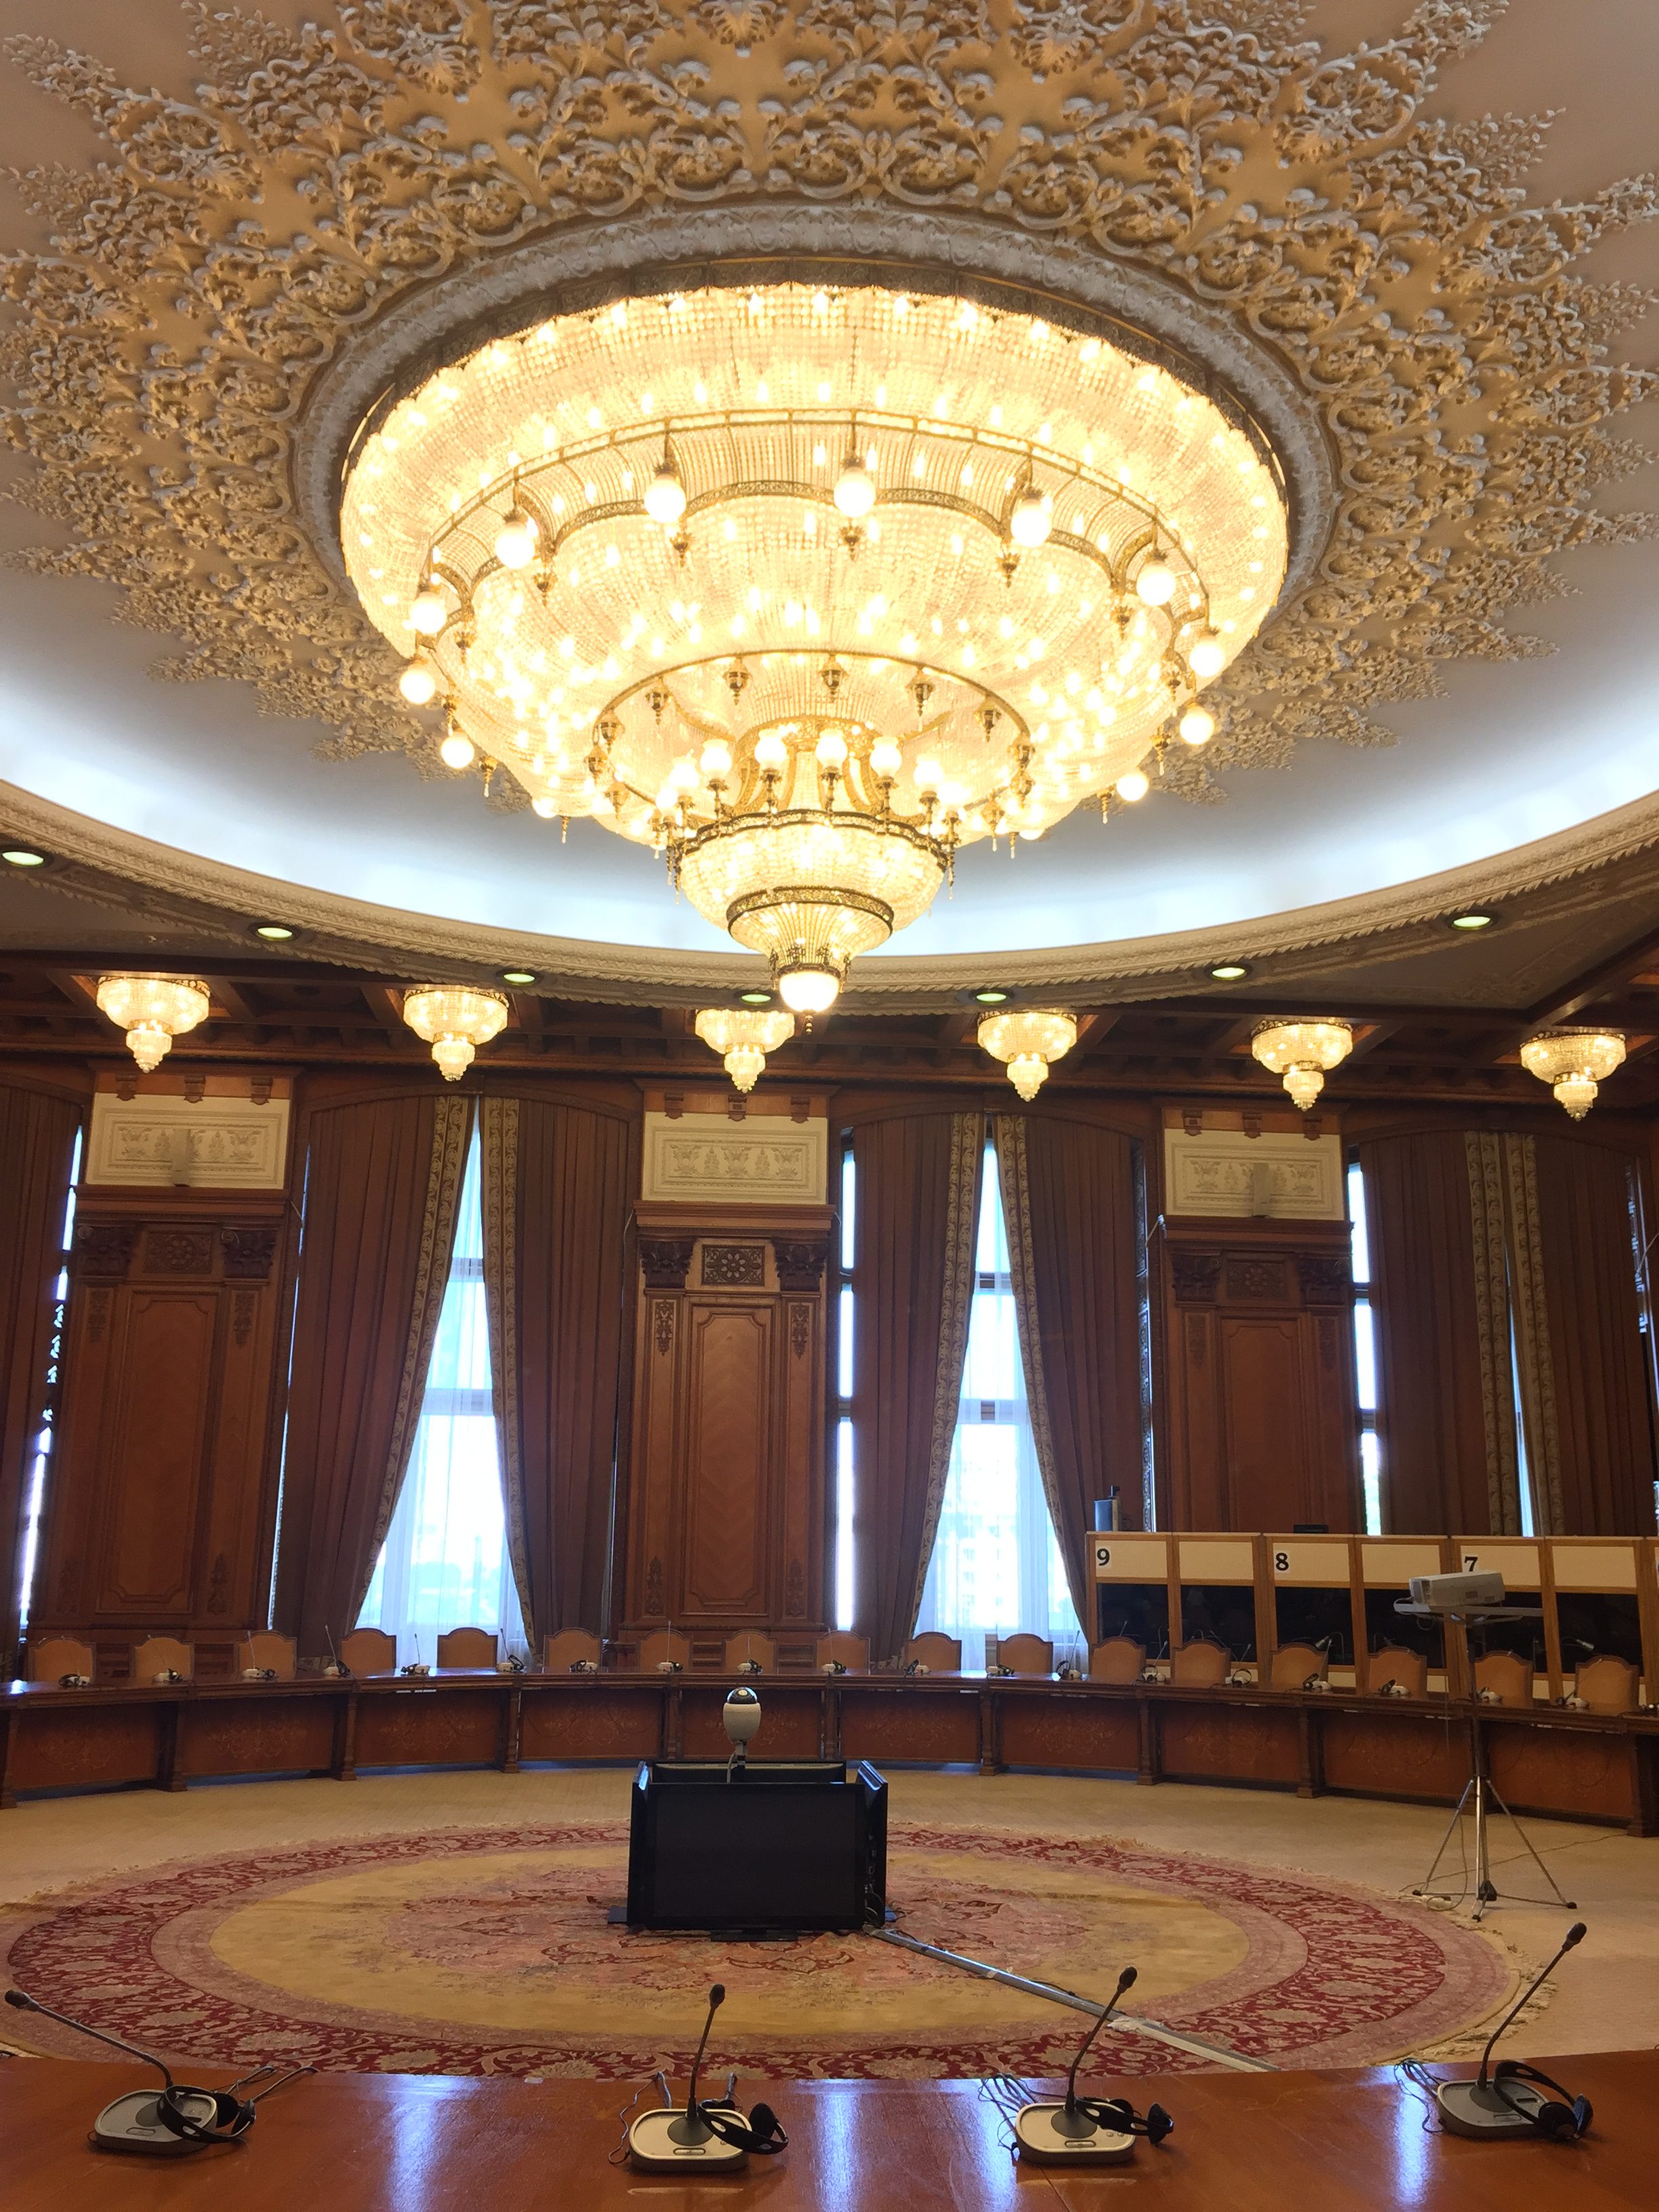 Another room in the Palace of the Parliament